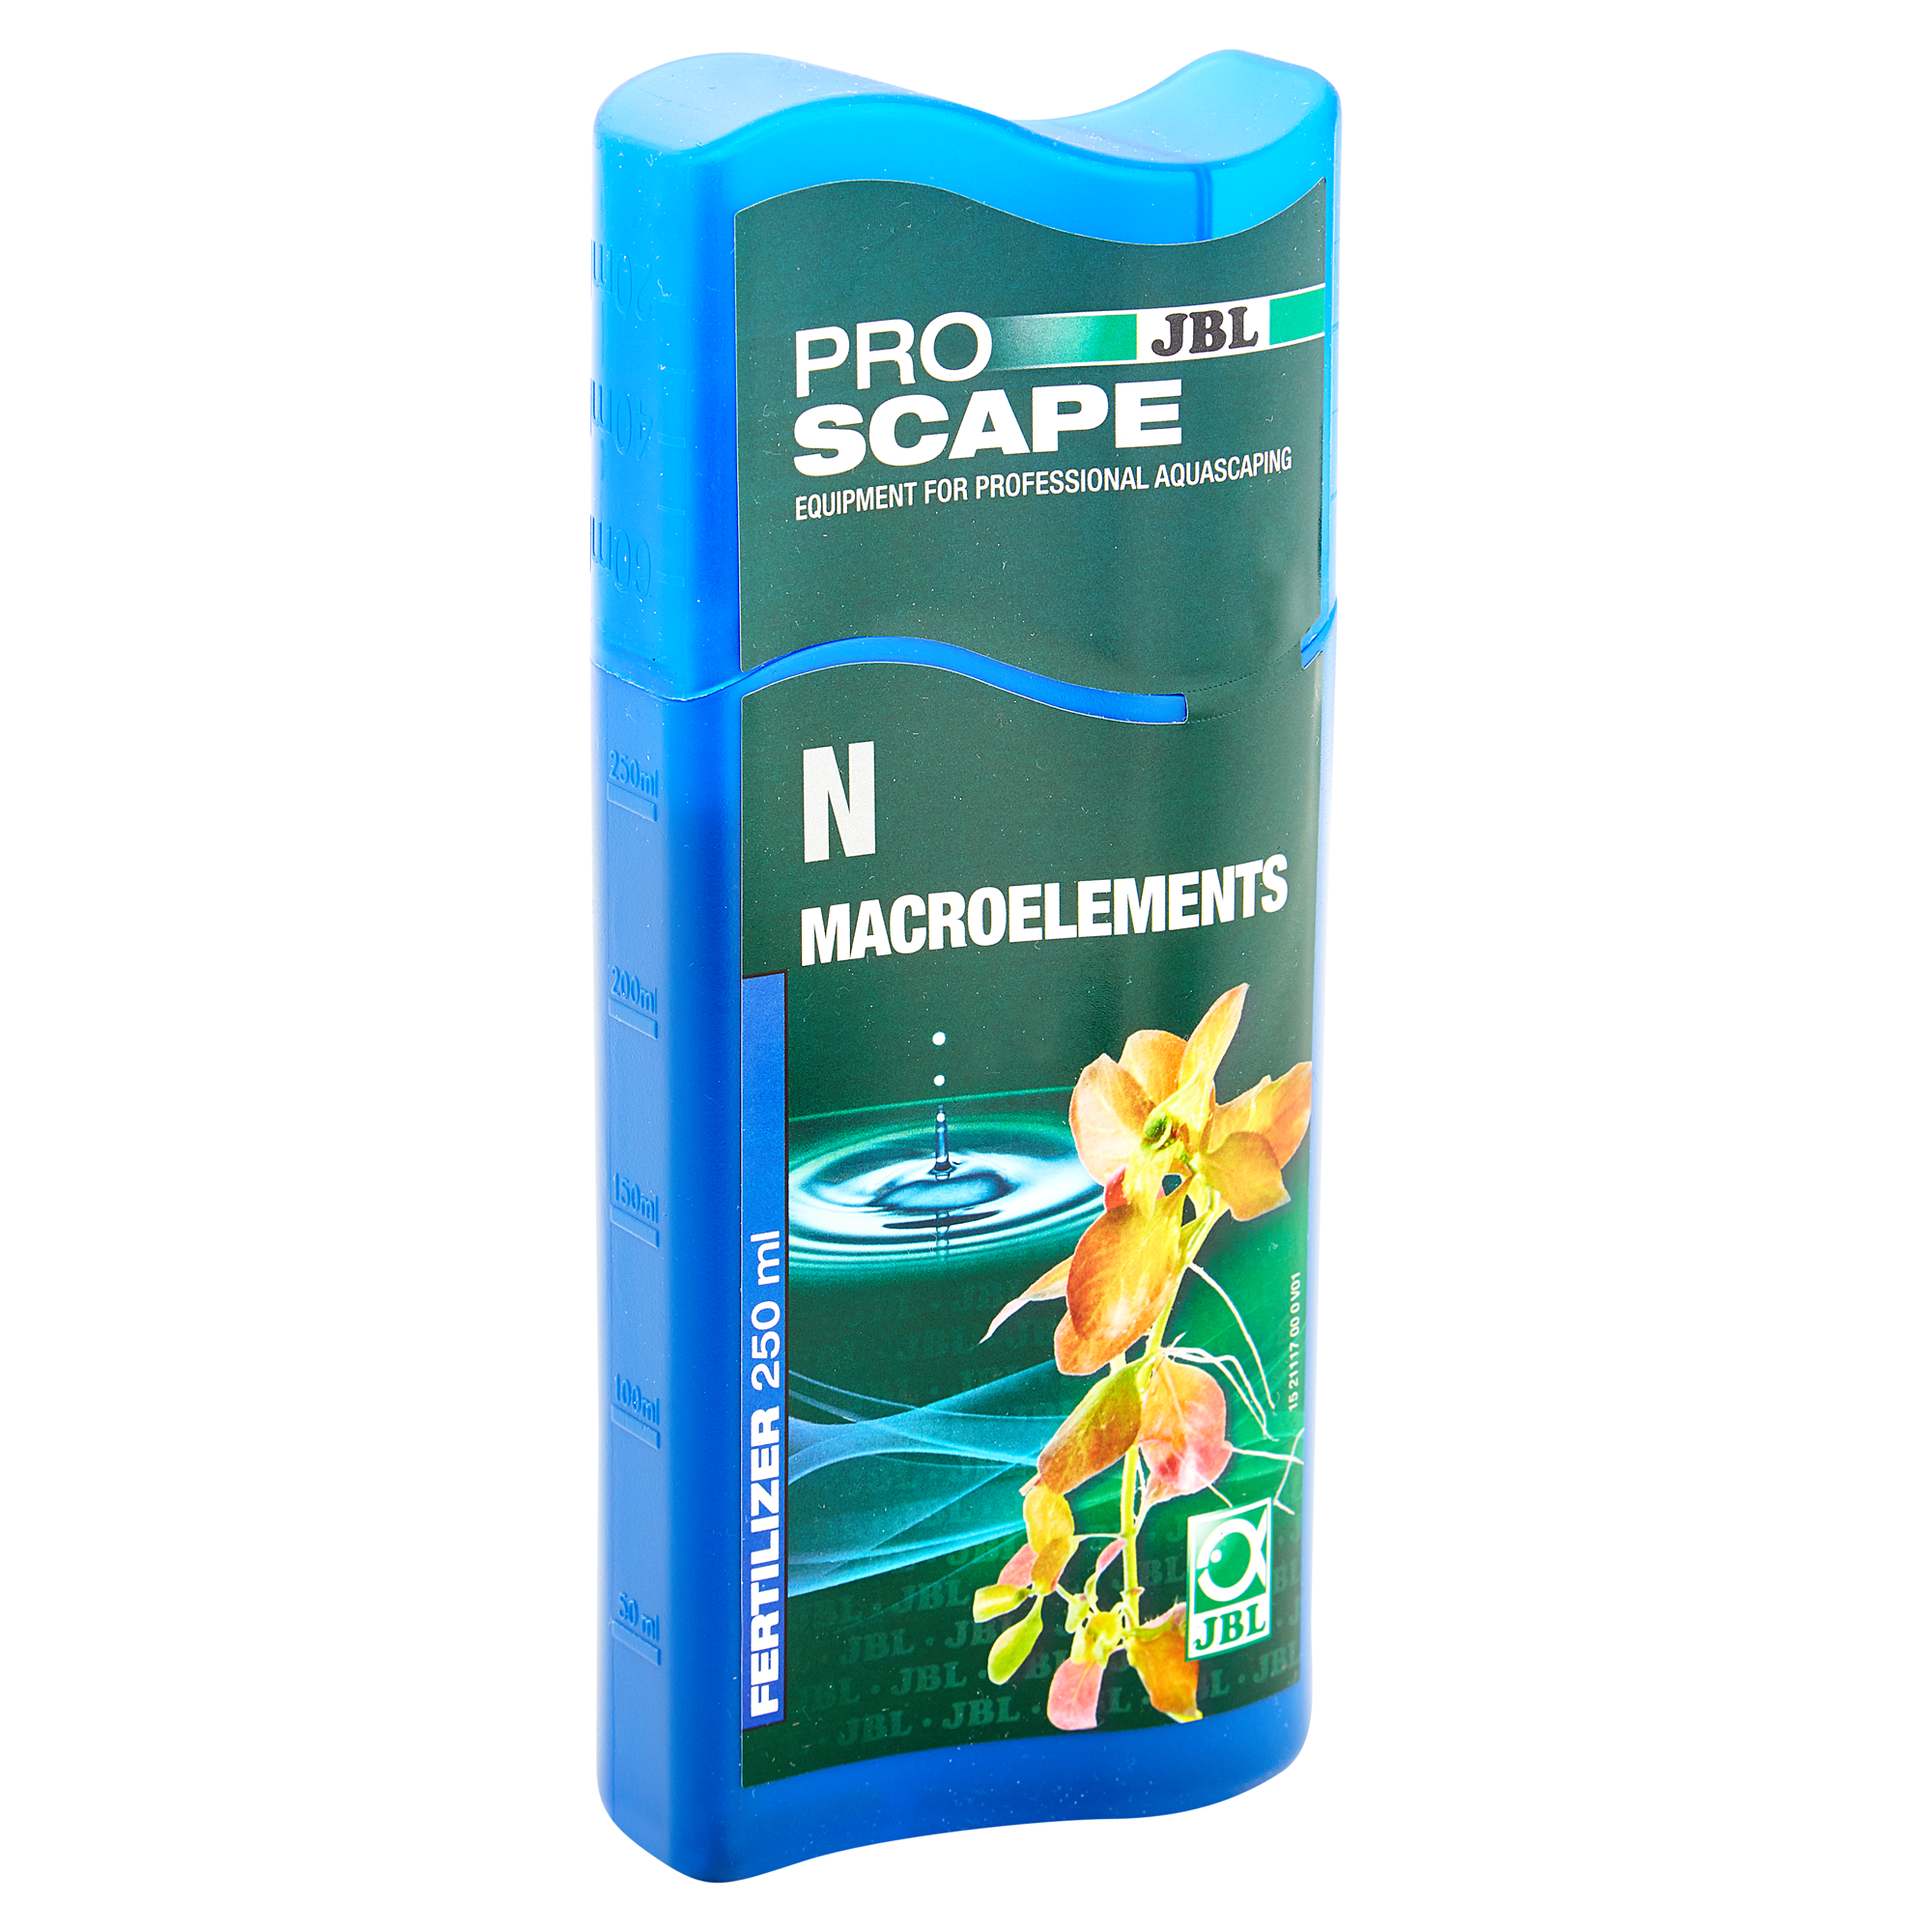 Pflanzendünger "Pro Scape" N Macroelements 250 ml + product picture